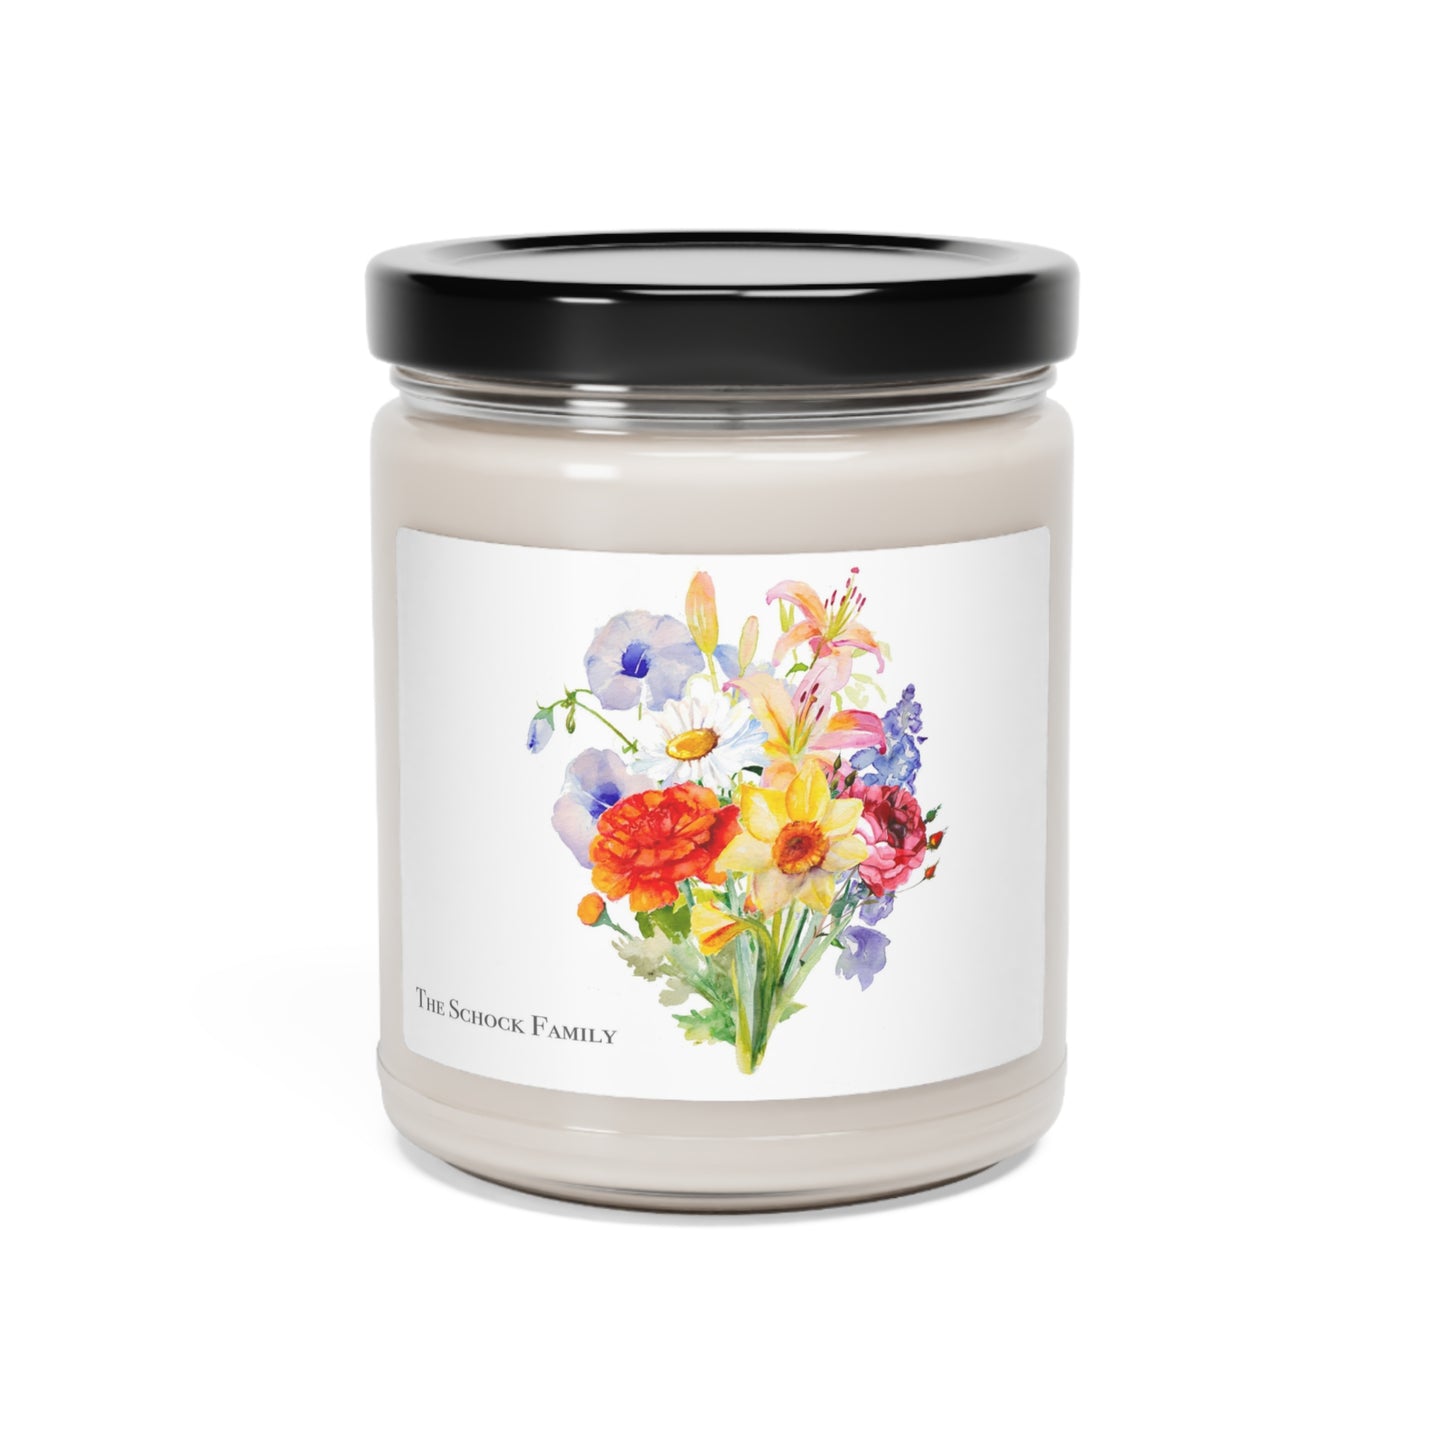 Family Birth Flower Bouquet - Custom Mother's Day Gift - Scented Soy Candle - 9 oz